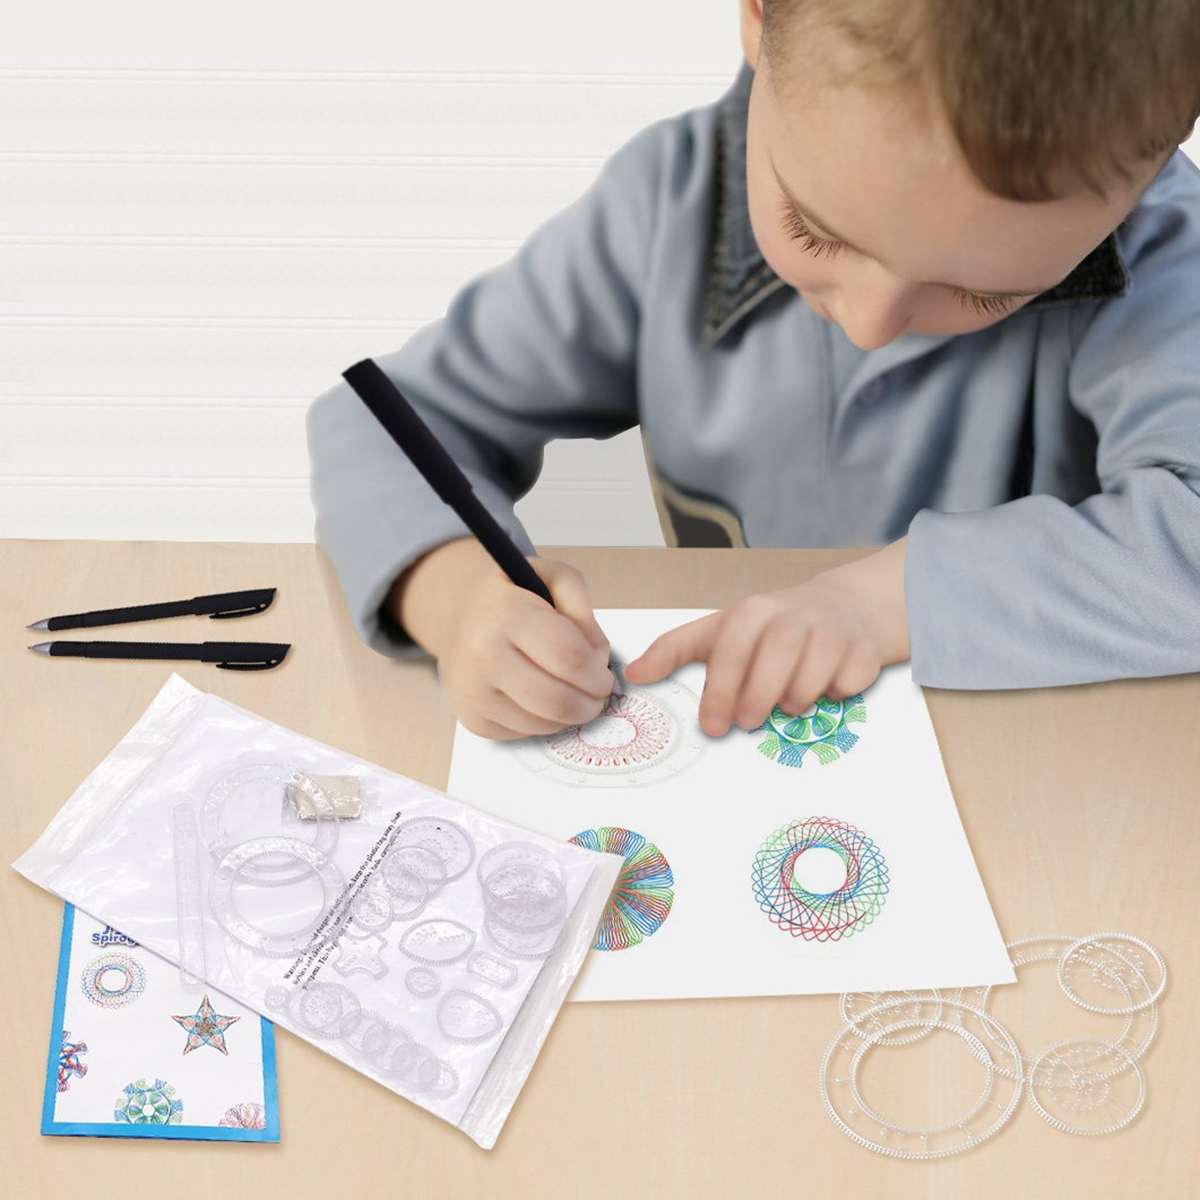 28pcs Spirograph Drawing Toys Set Interlocking Gears Wheels Painting Drawing Accessories Creative Educational Toy Spirographs